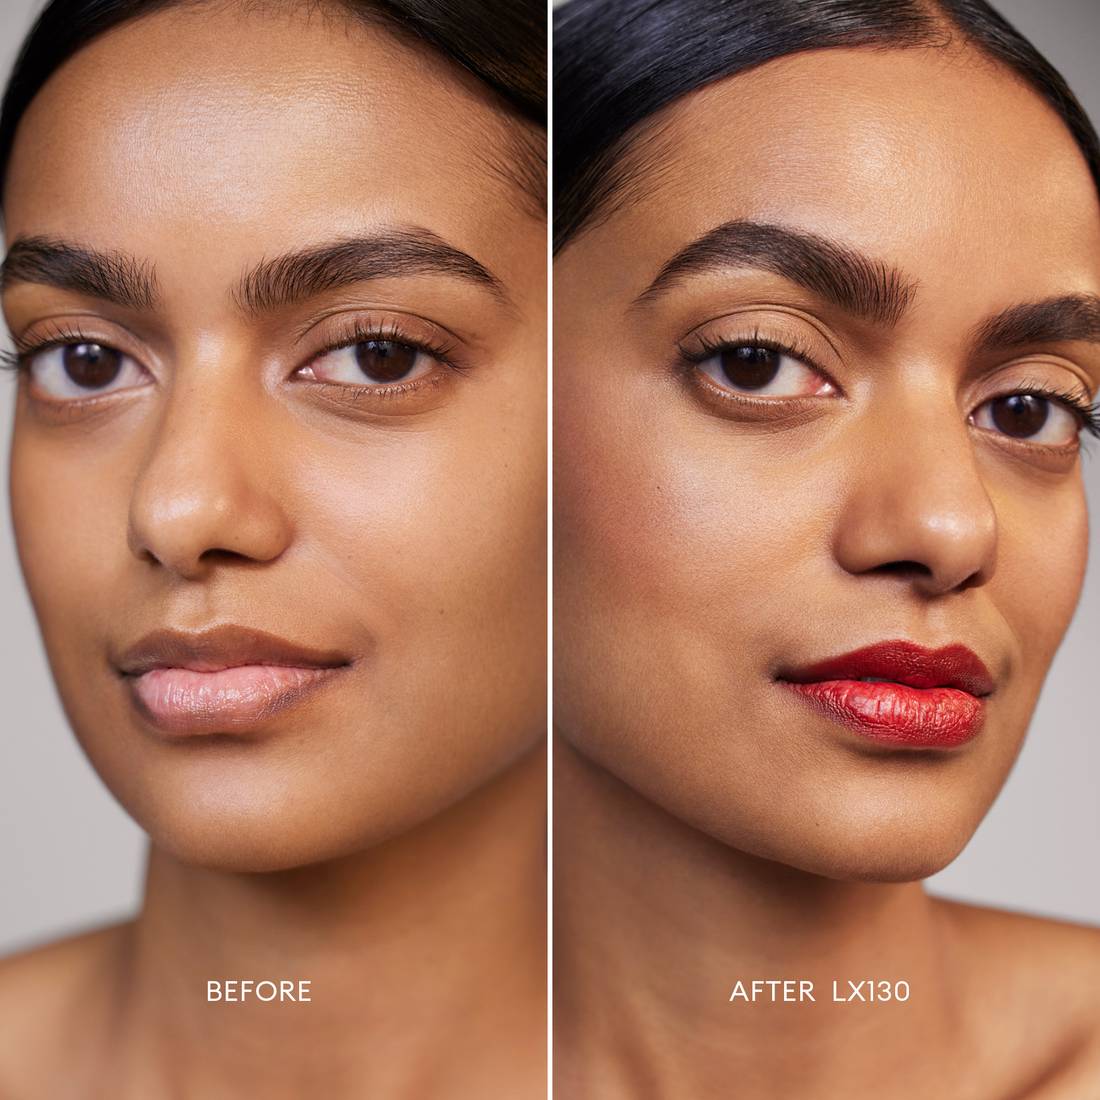 Before and after image of a Medium/Deep Skin Tone, Warm Golden Undertone model wearing Softlight Luminous Hydrating Concealer in shade 130. 2